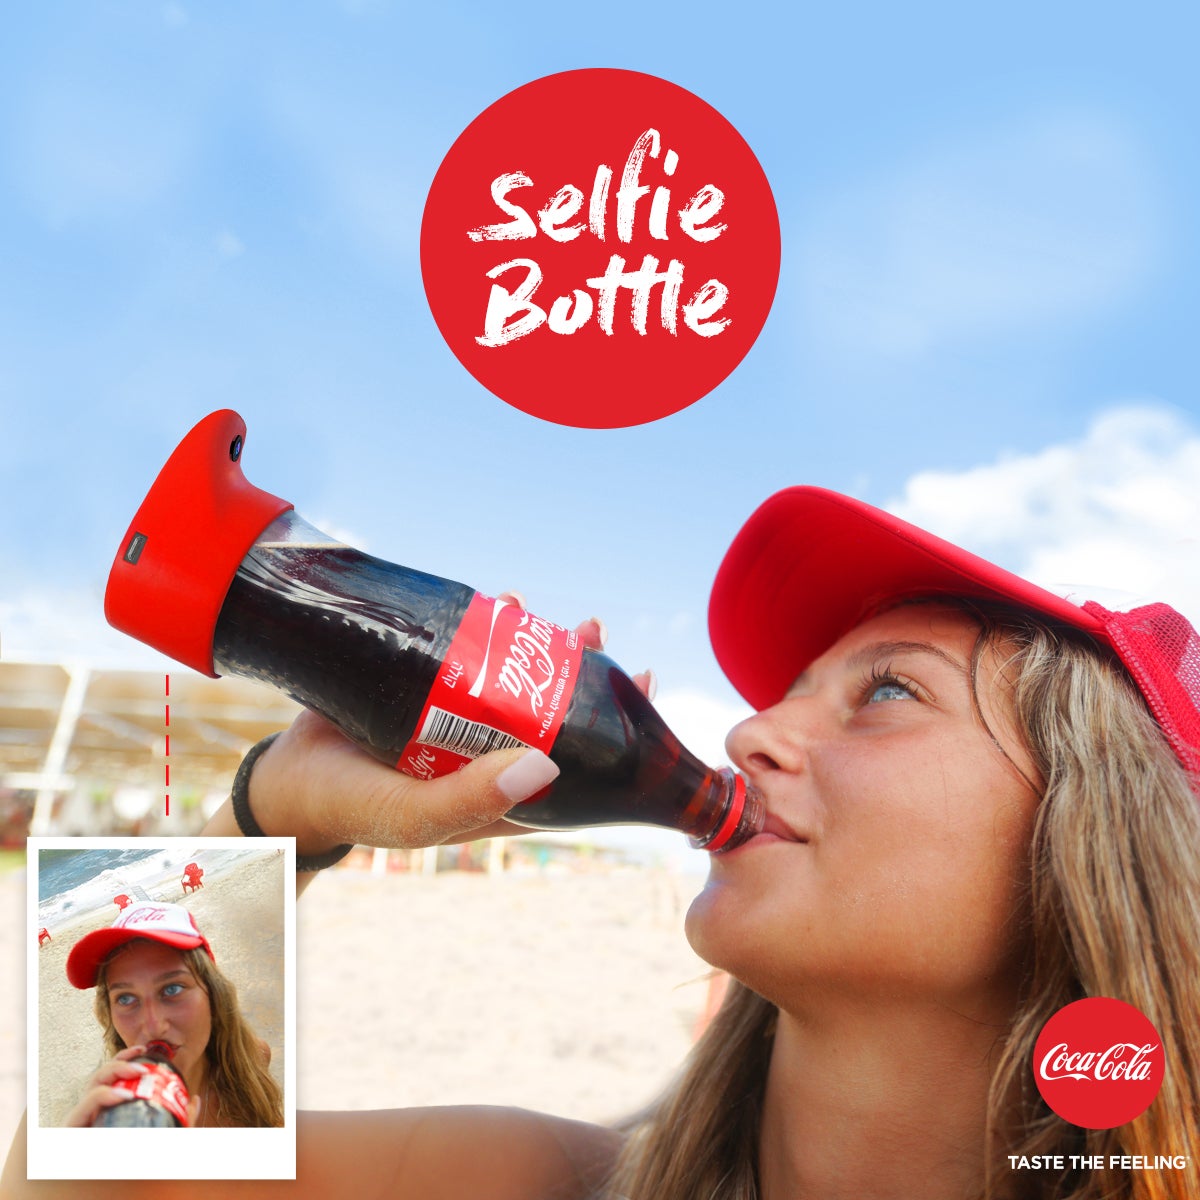 Can a bottle of Coke snap a selfie? Yes, apparently